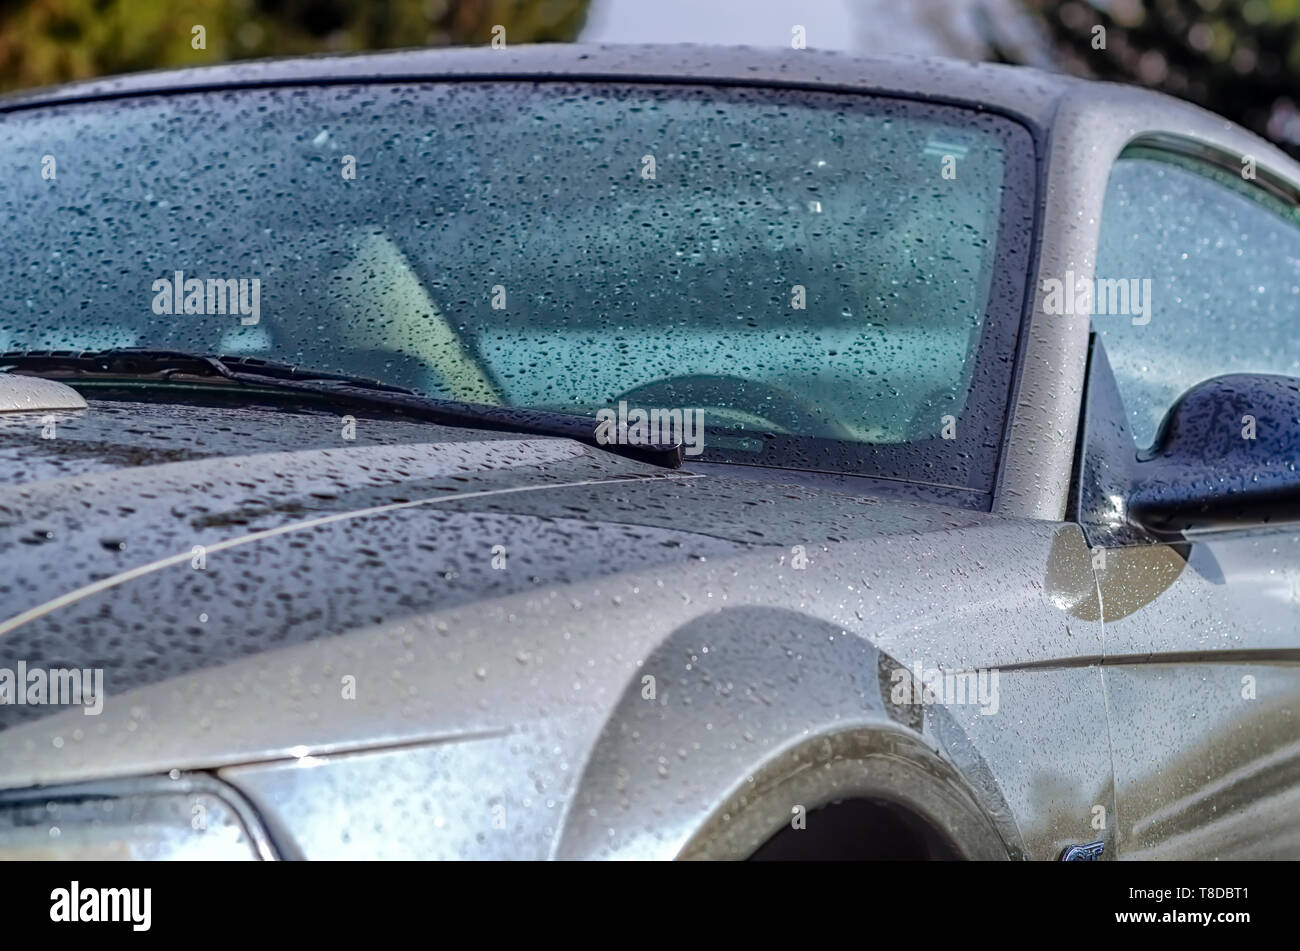 A 2001 Ford Mustang GT Coupe glistening in the sun after a summer storm. Tiny water droplets on the car's body are glistening like beads. Stock Photo